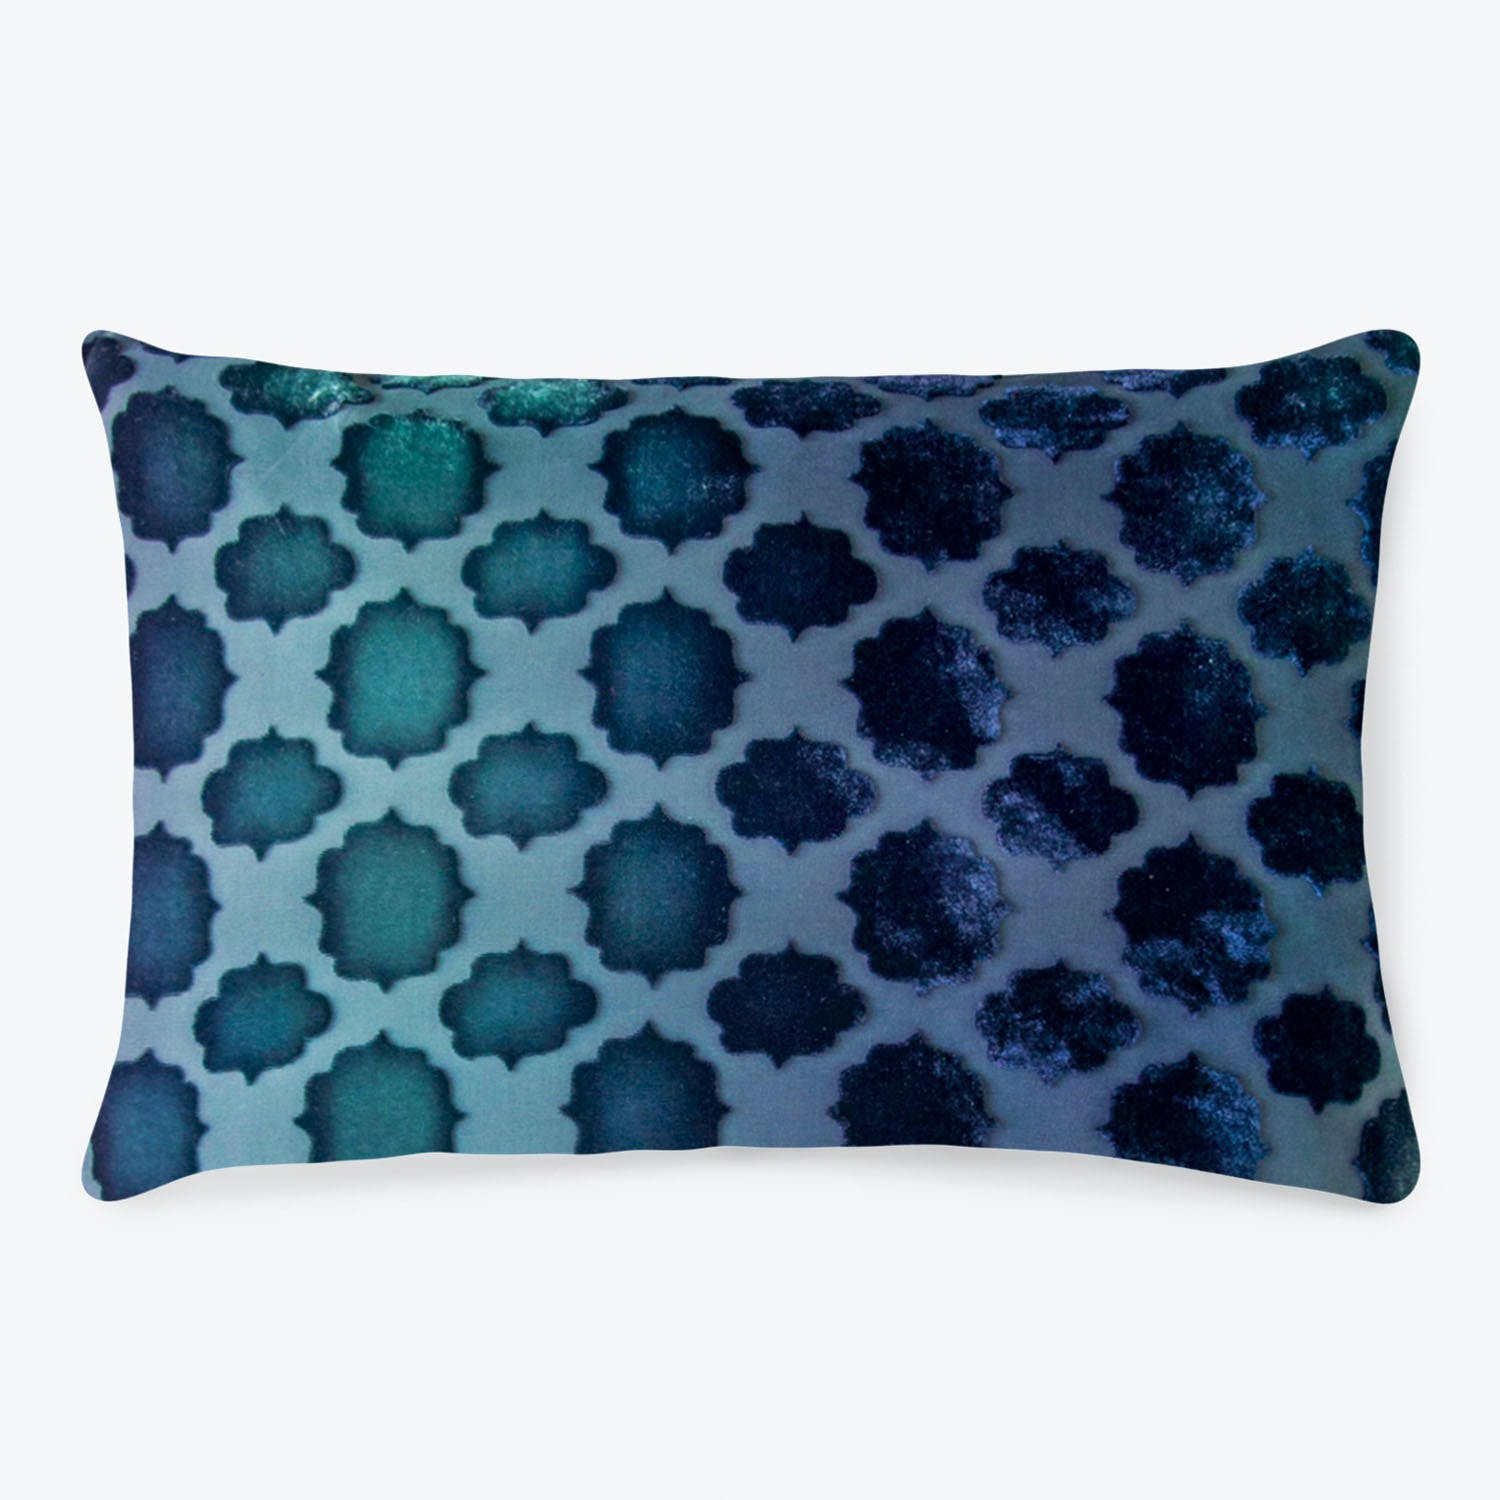 Rectangular pillow with a gradient pattern of stylized flower shapes.